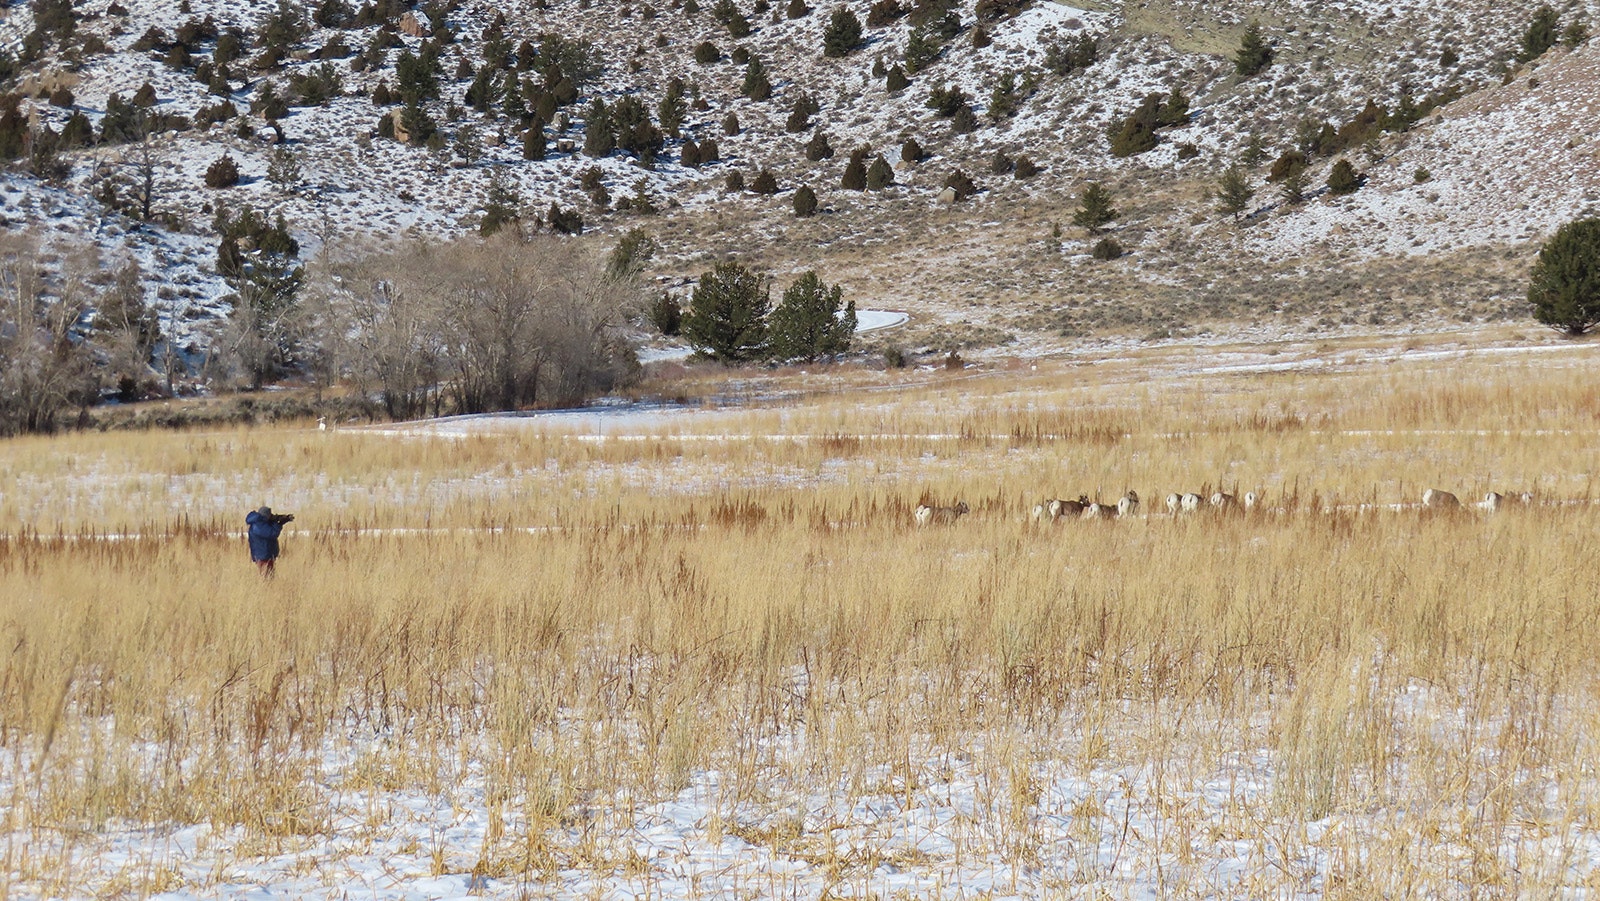 Fans of bighorn sheep getting too close to “Ramland Wyoming” bighorns near Dubois can stress the animals.